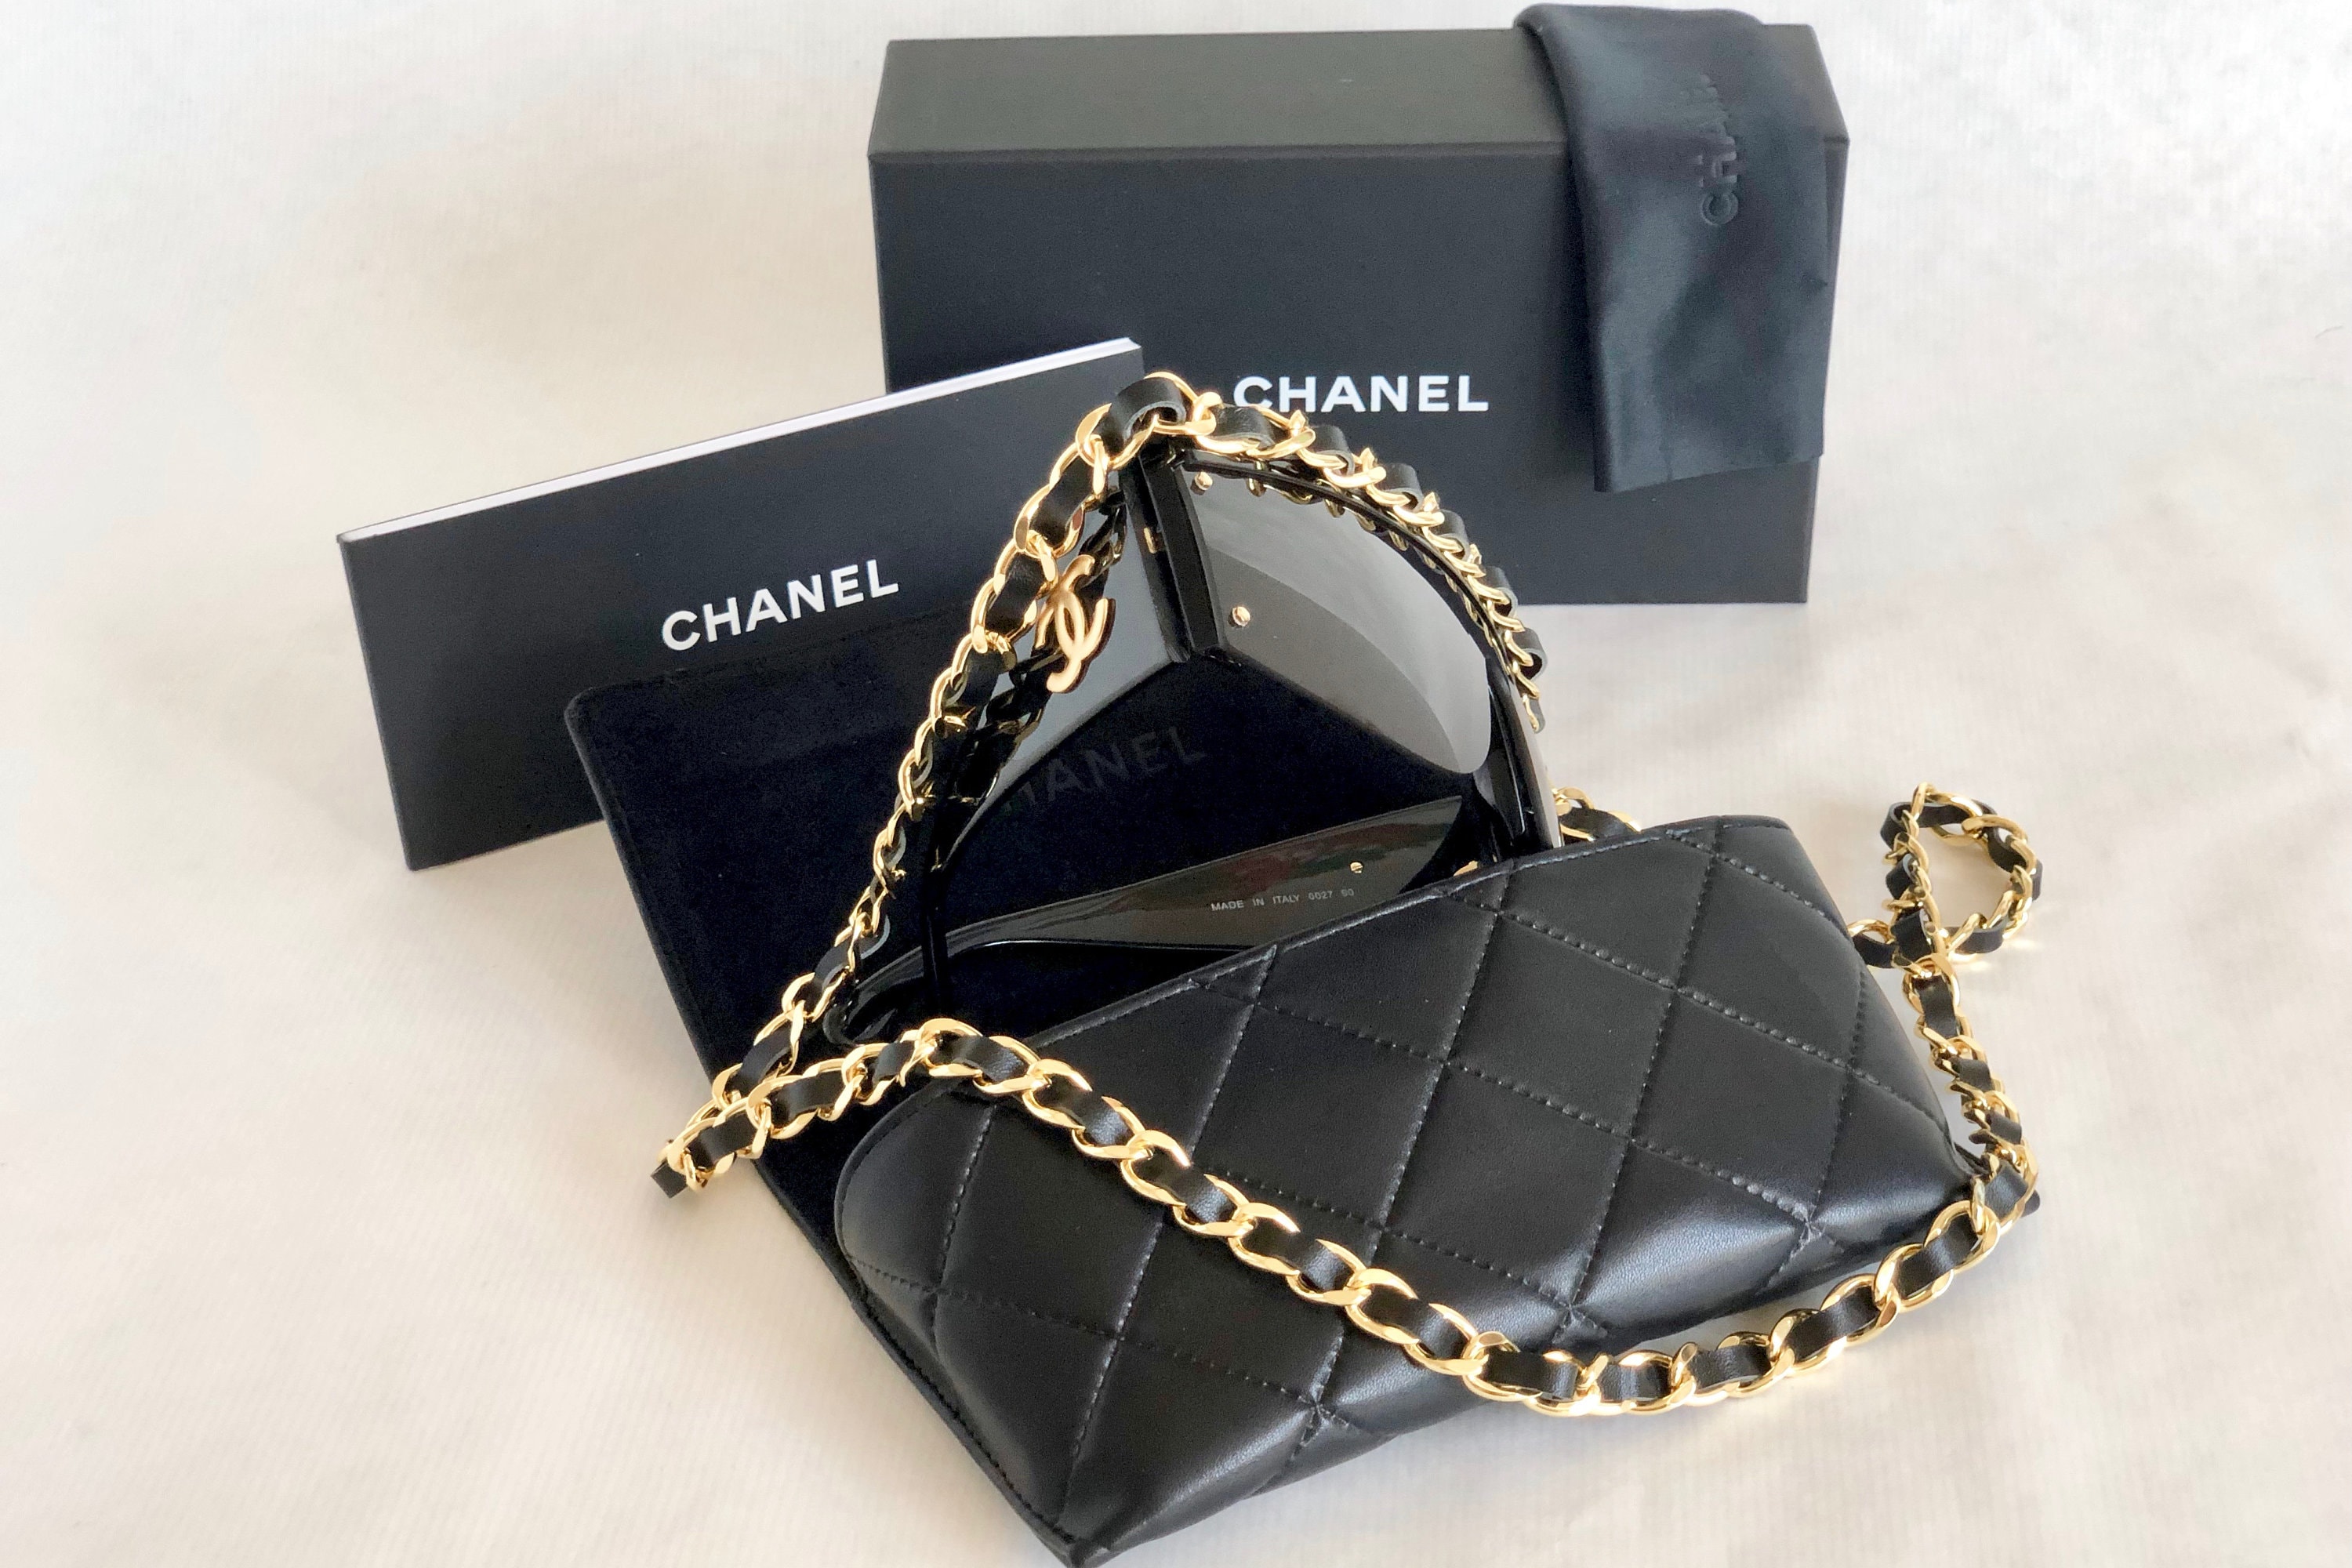 CHANEL 0027 LADY GAGA EXCLUSIVE & TIMELESS